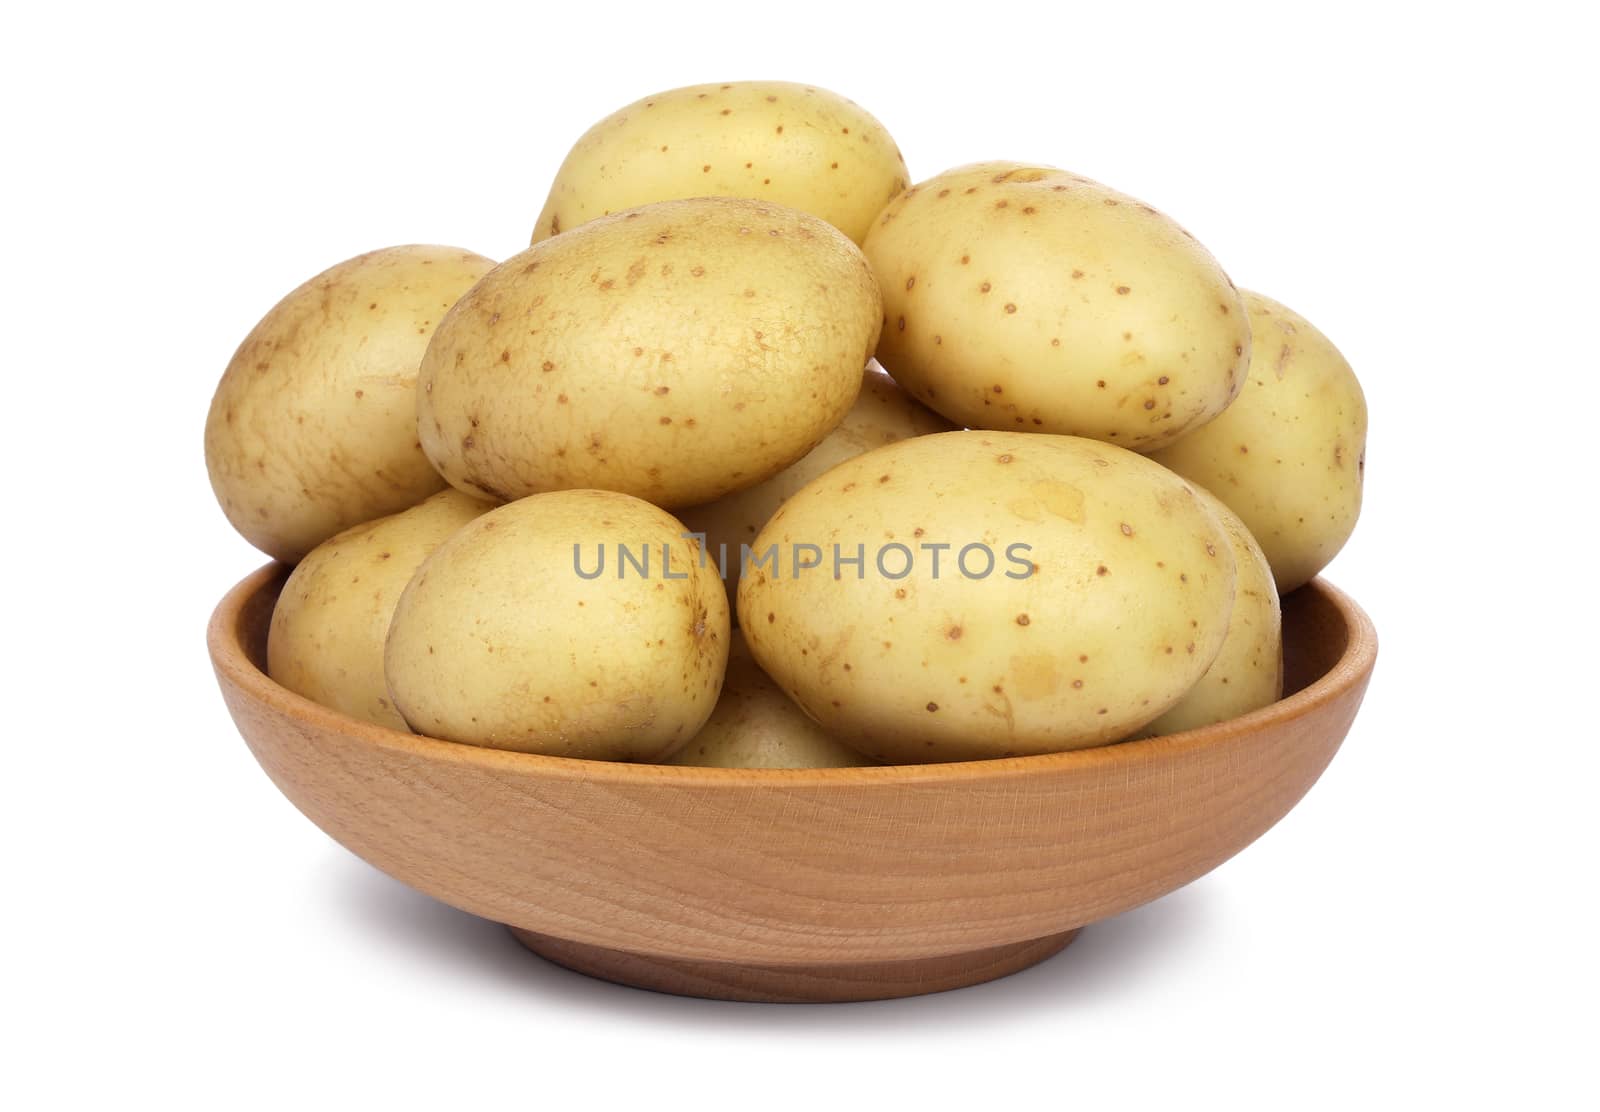 Raw unpeeled potatoes by leventina